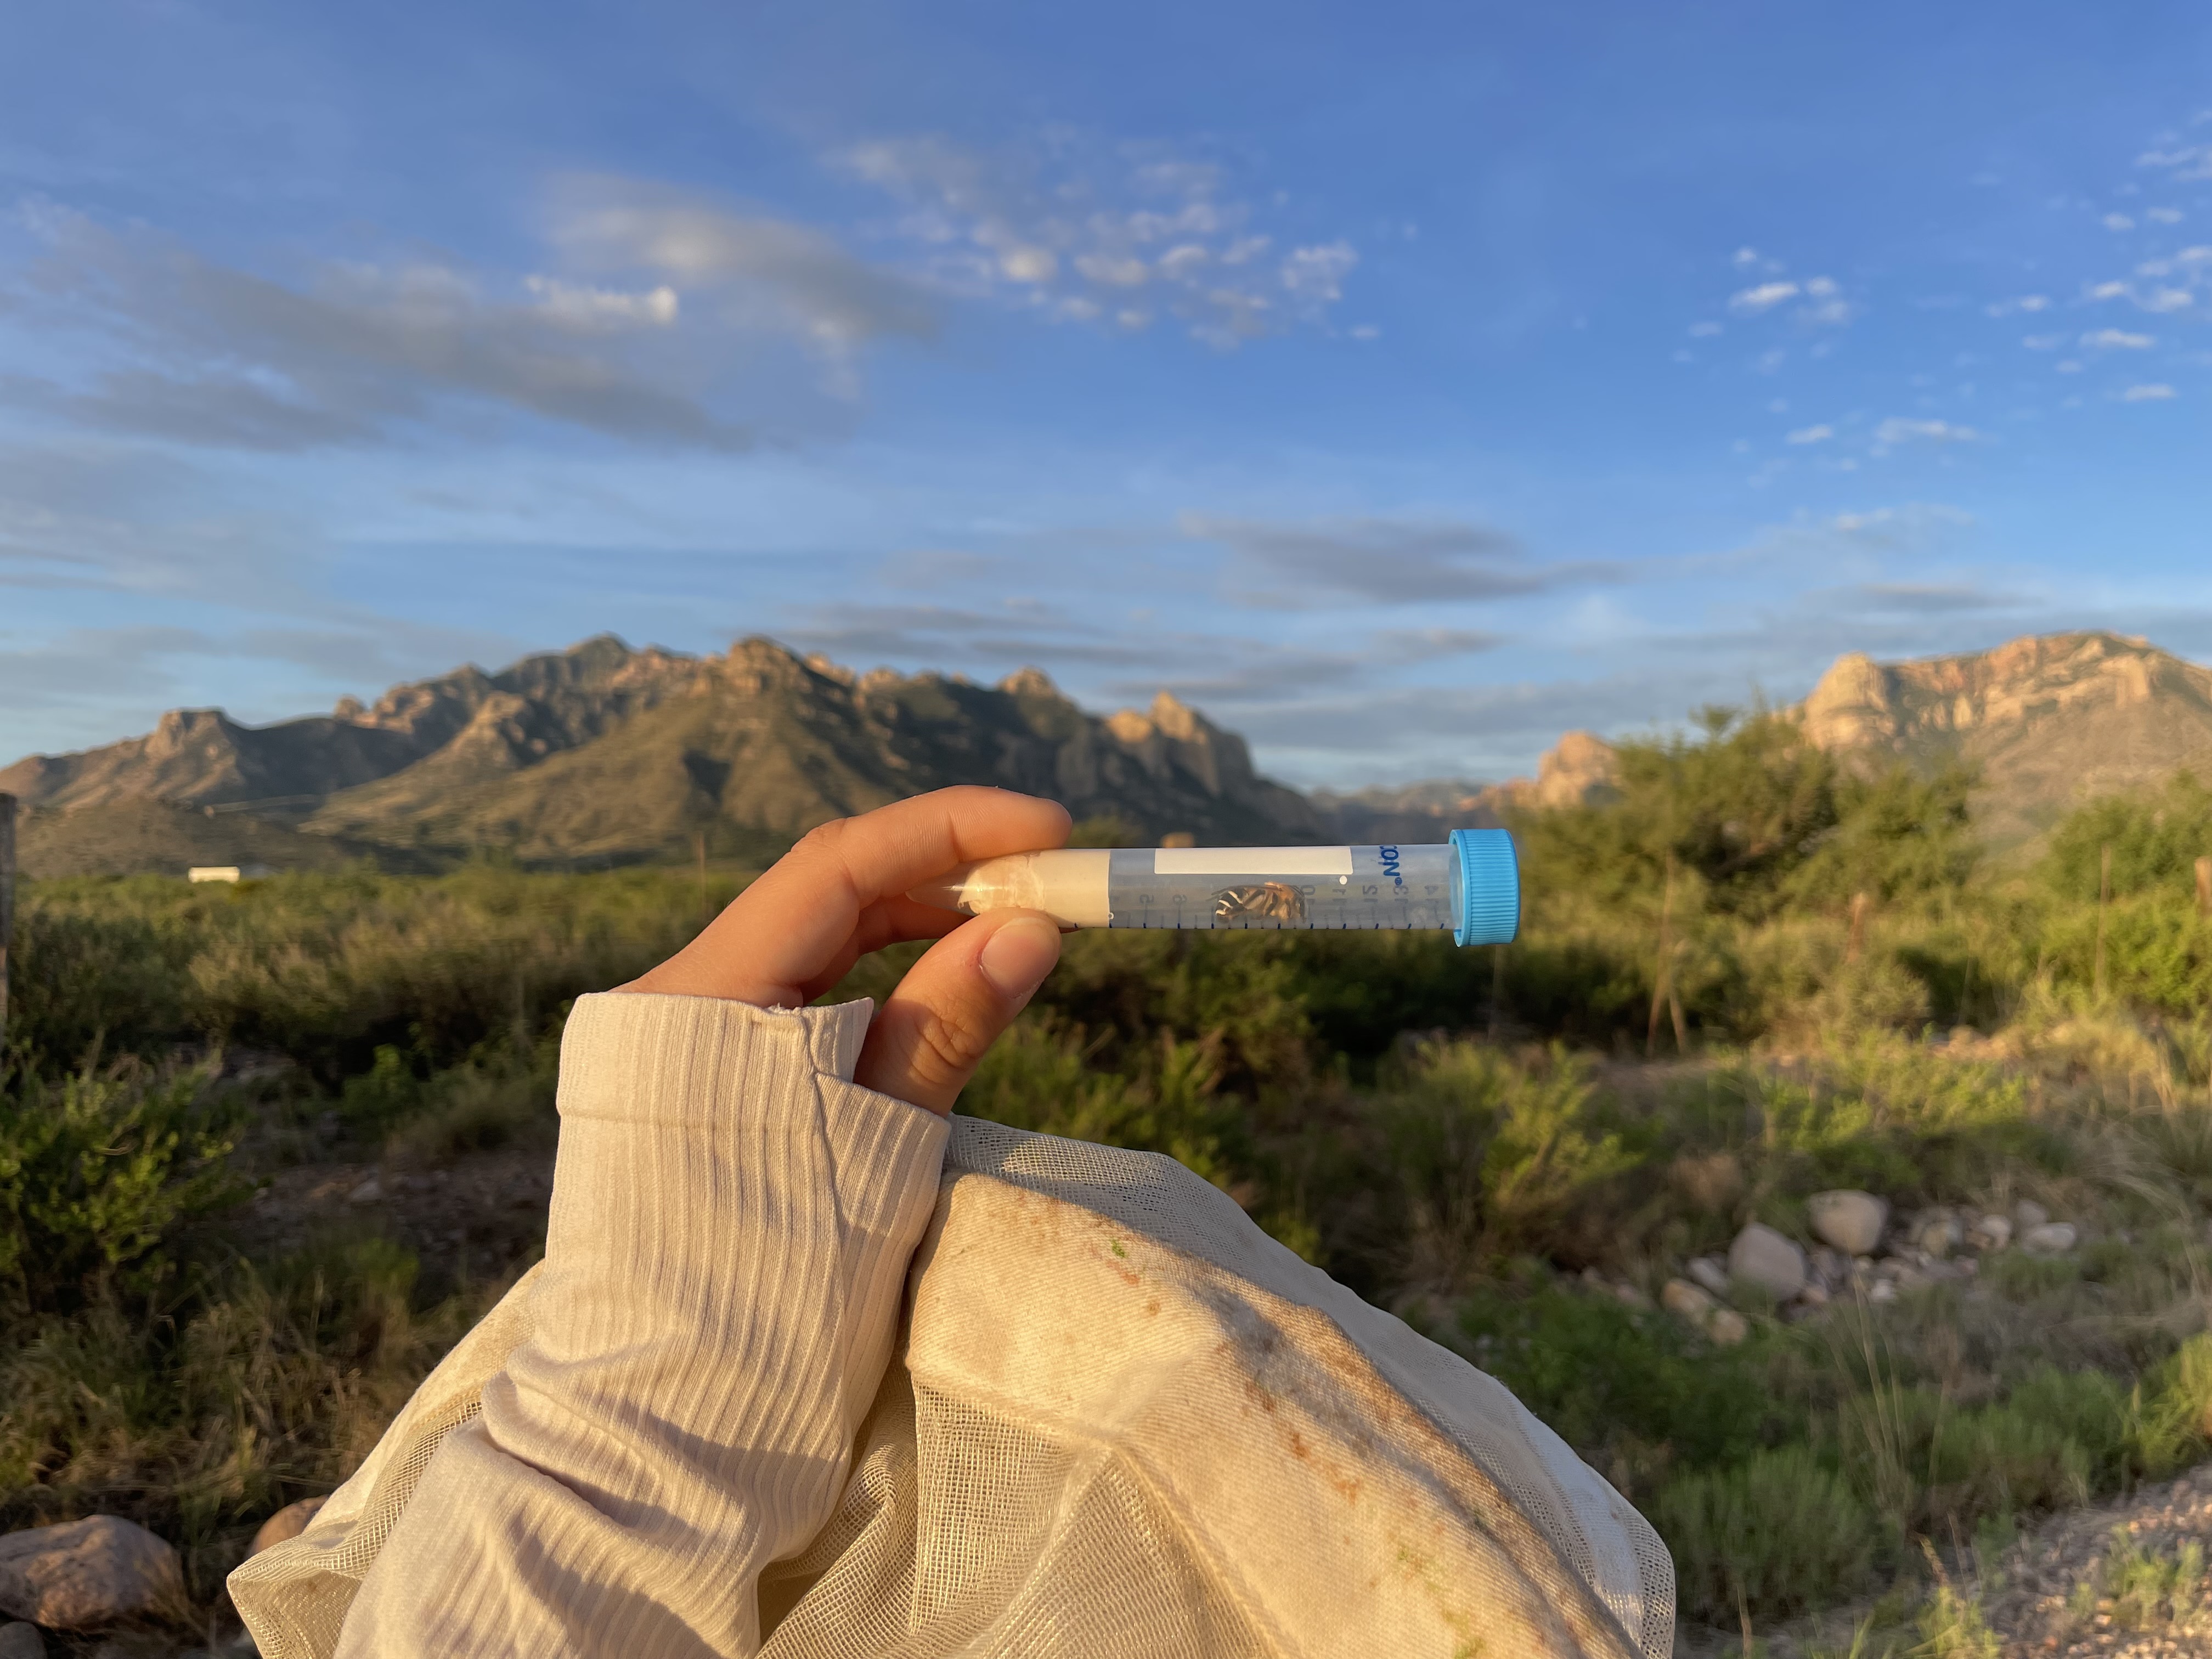 Natalie holding a Falcon Tube with a collected bee in it at a field site in Arizona.